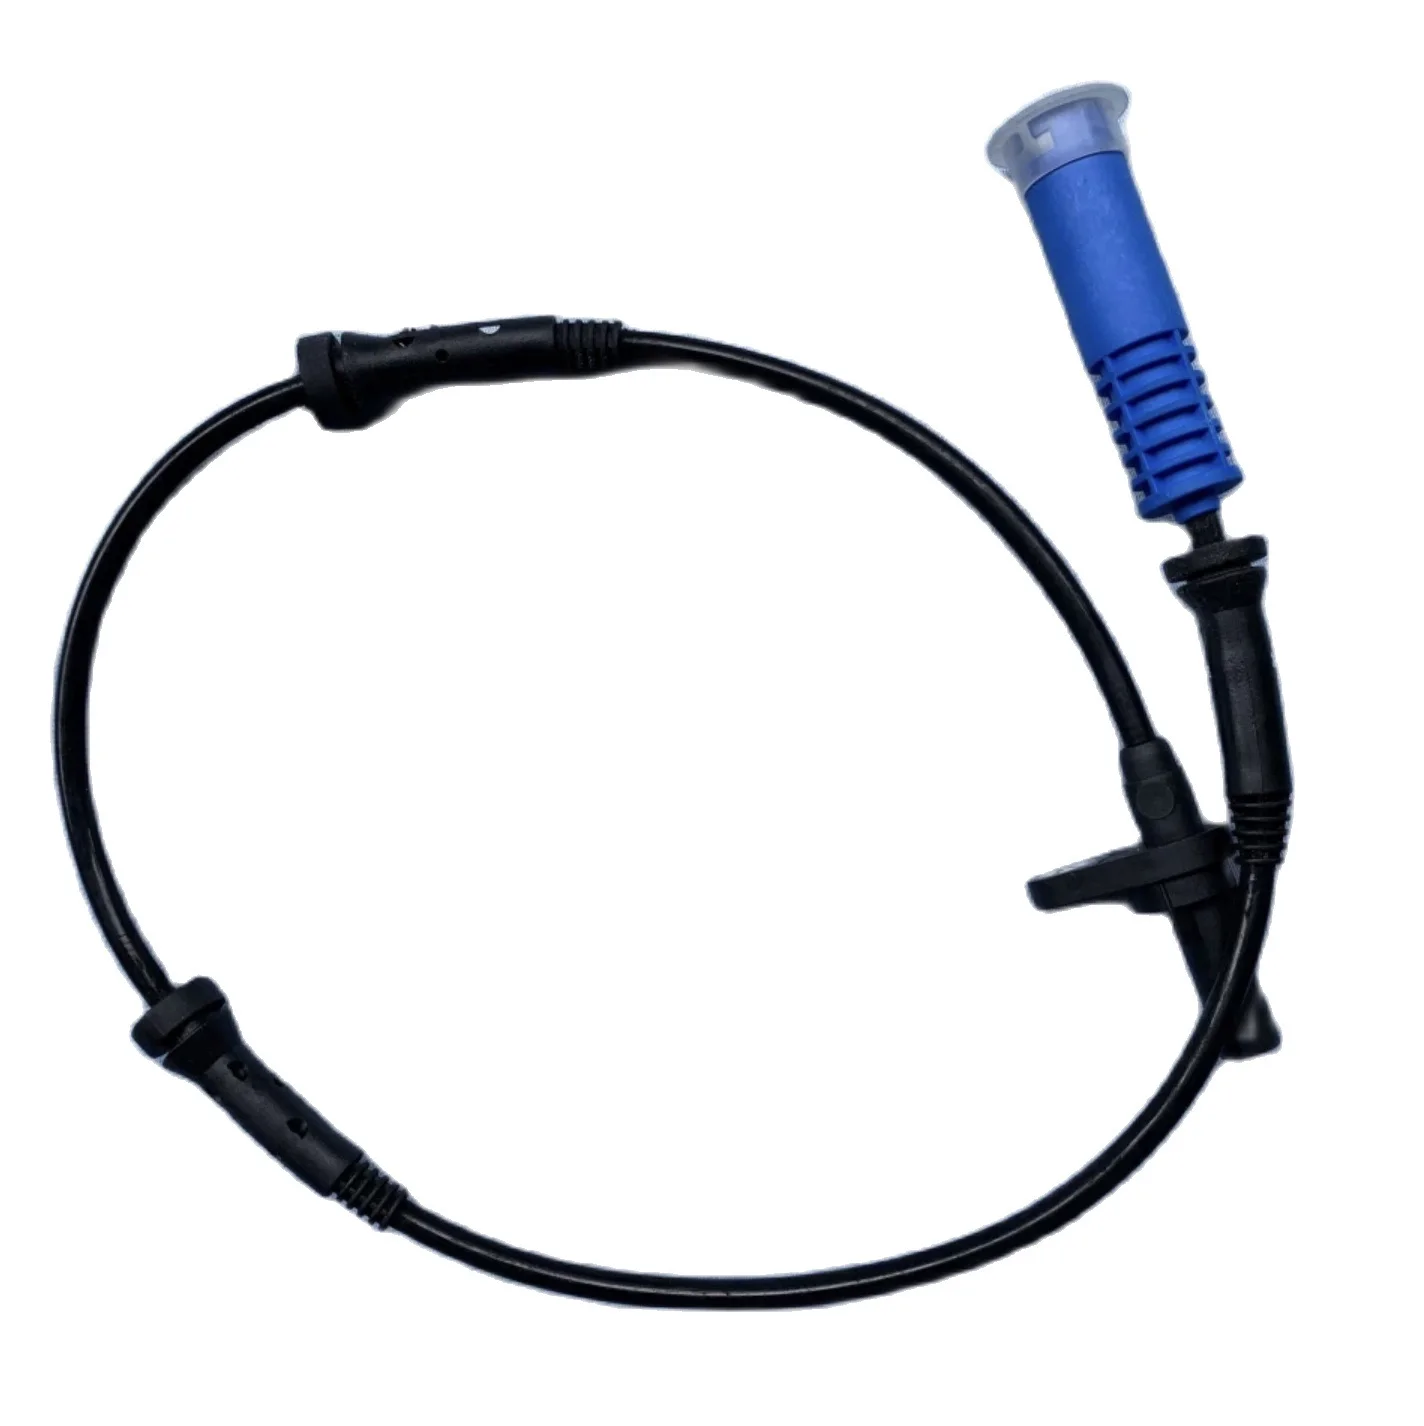 34526771702 FRONT LEFT RIGHT ABS WHEEL SPEED SENSOR FOR 5 6 SERIES ORIGINAL PARTS dvp32eh00t3 l new original plc eh3 series 100 240vac 16di 16do relay output left left interface